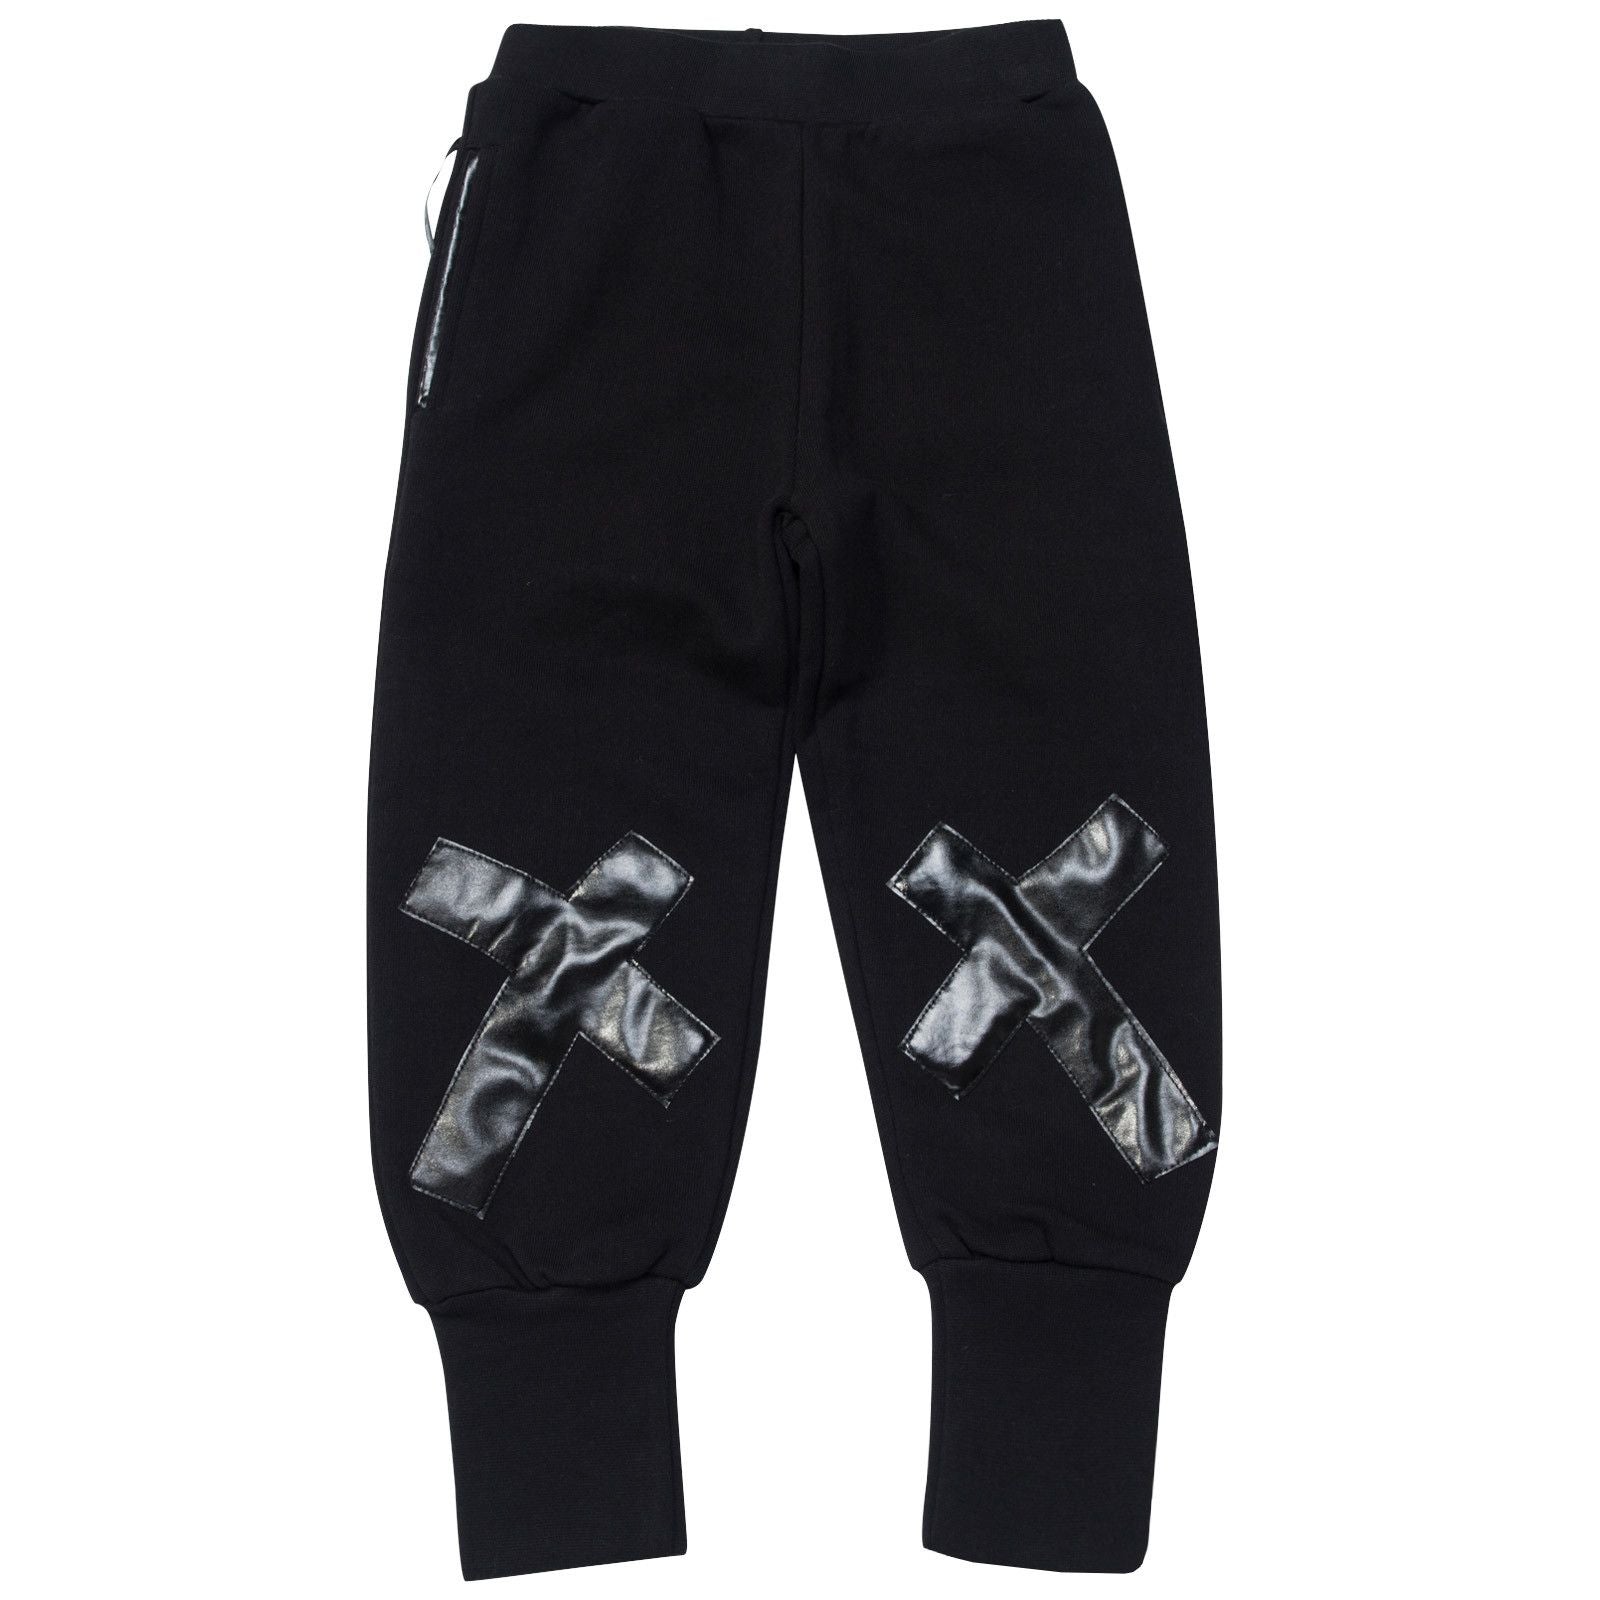 Boys&Girls Black Tight Cuffs Trouses With Black Printed Trims On Legs - CÉMAROSE | Children's Fashion Store - 1